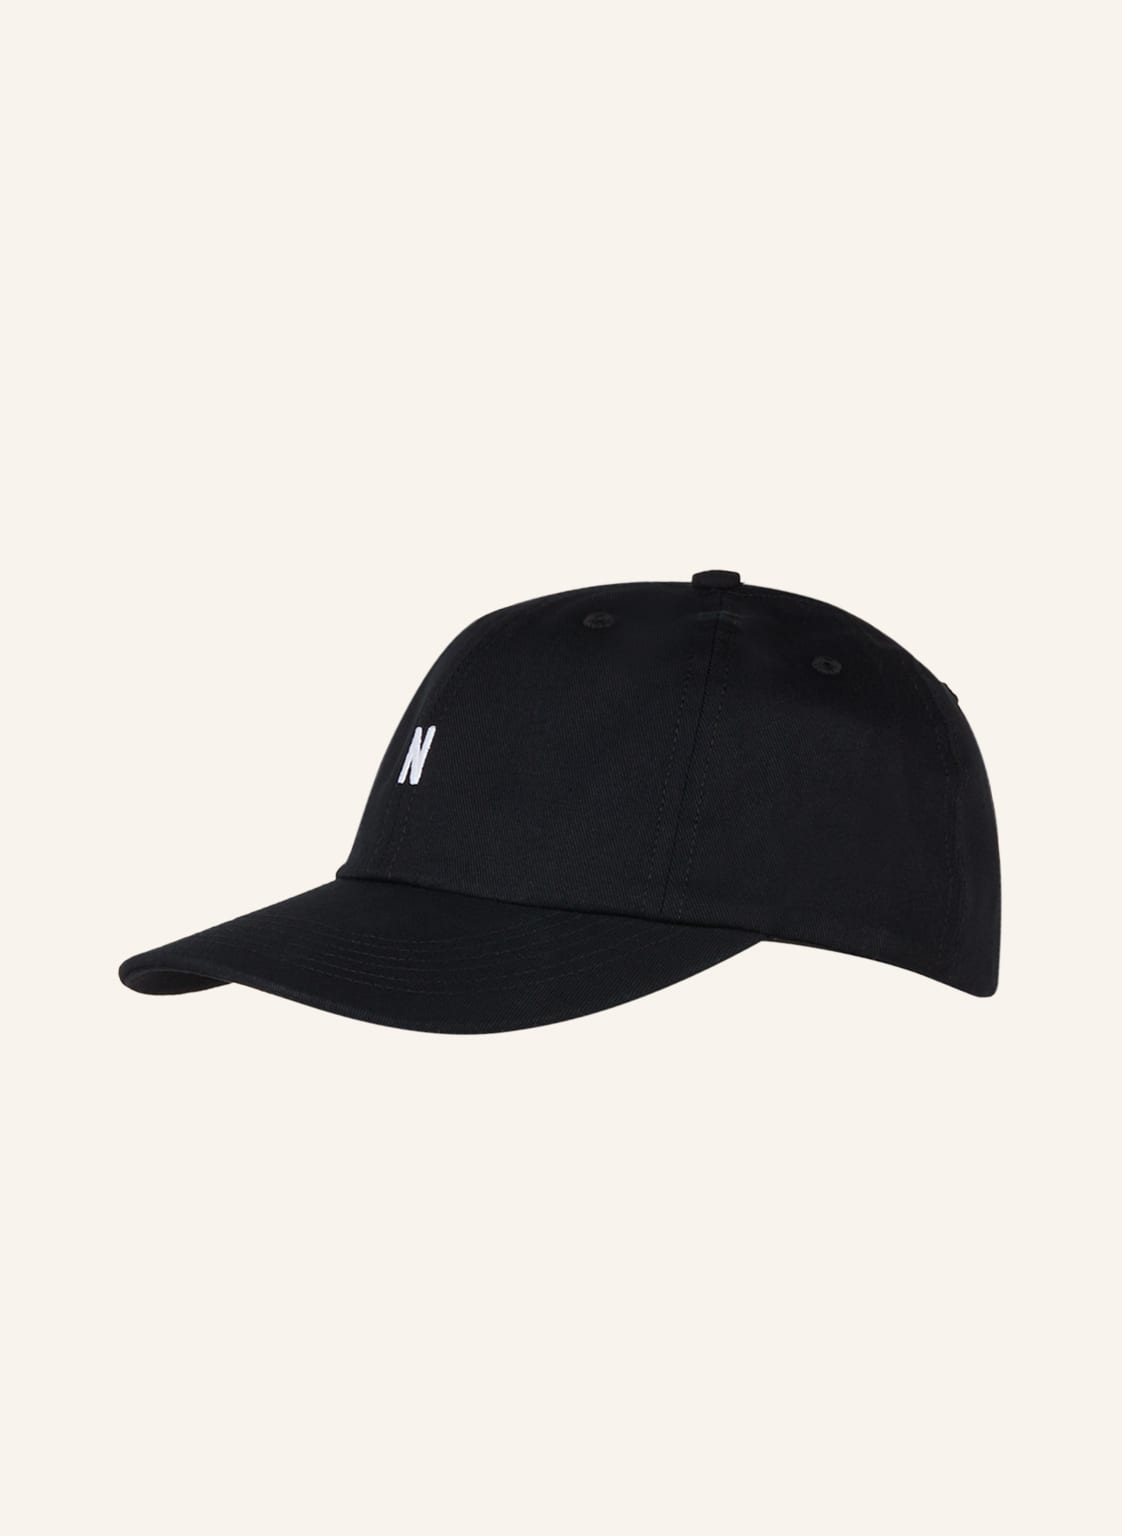 Norse Projects Cap schwarz von Norse Projects